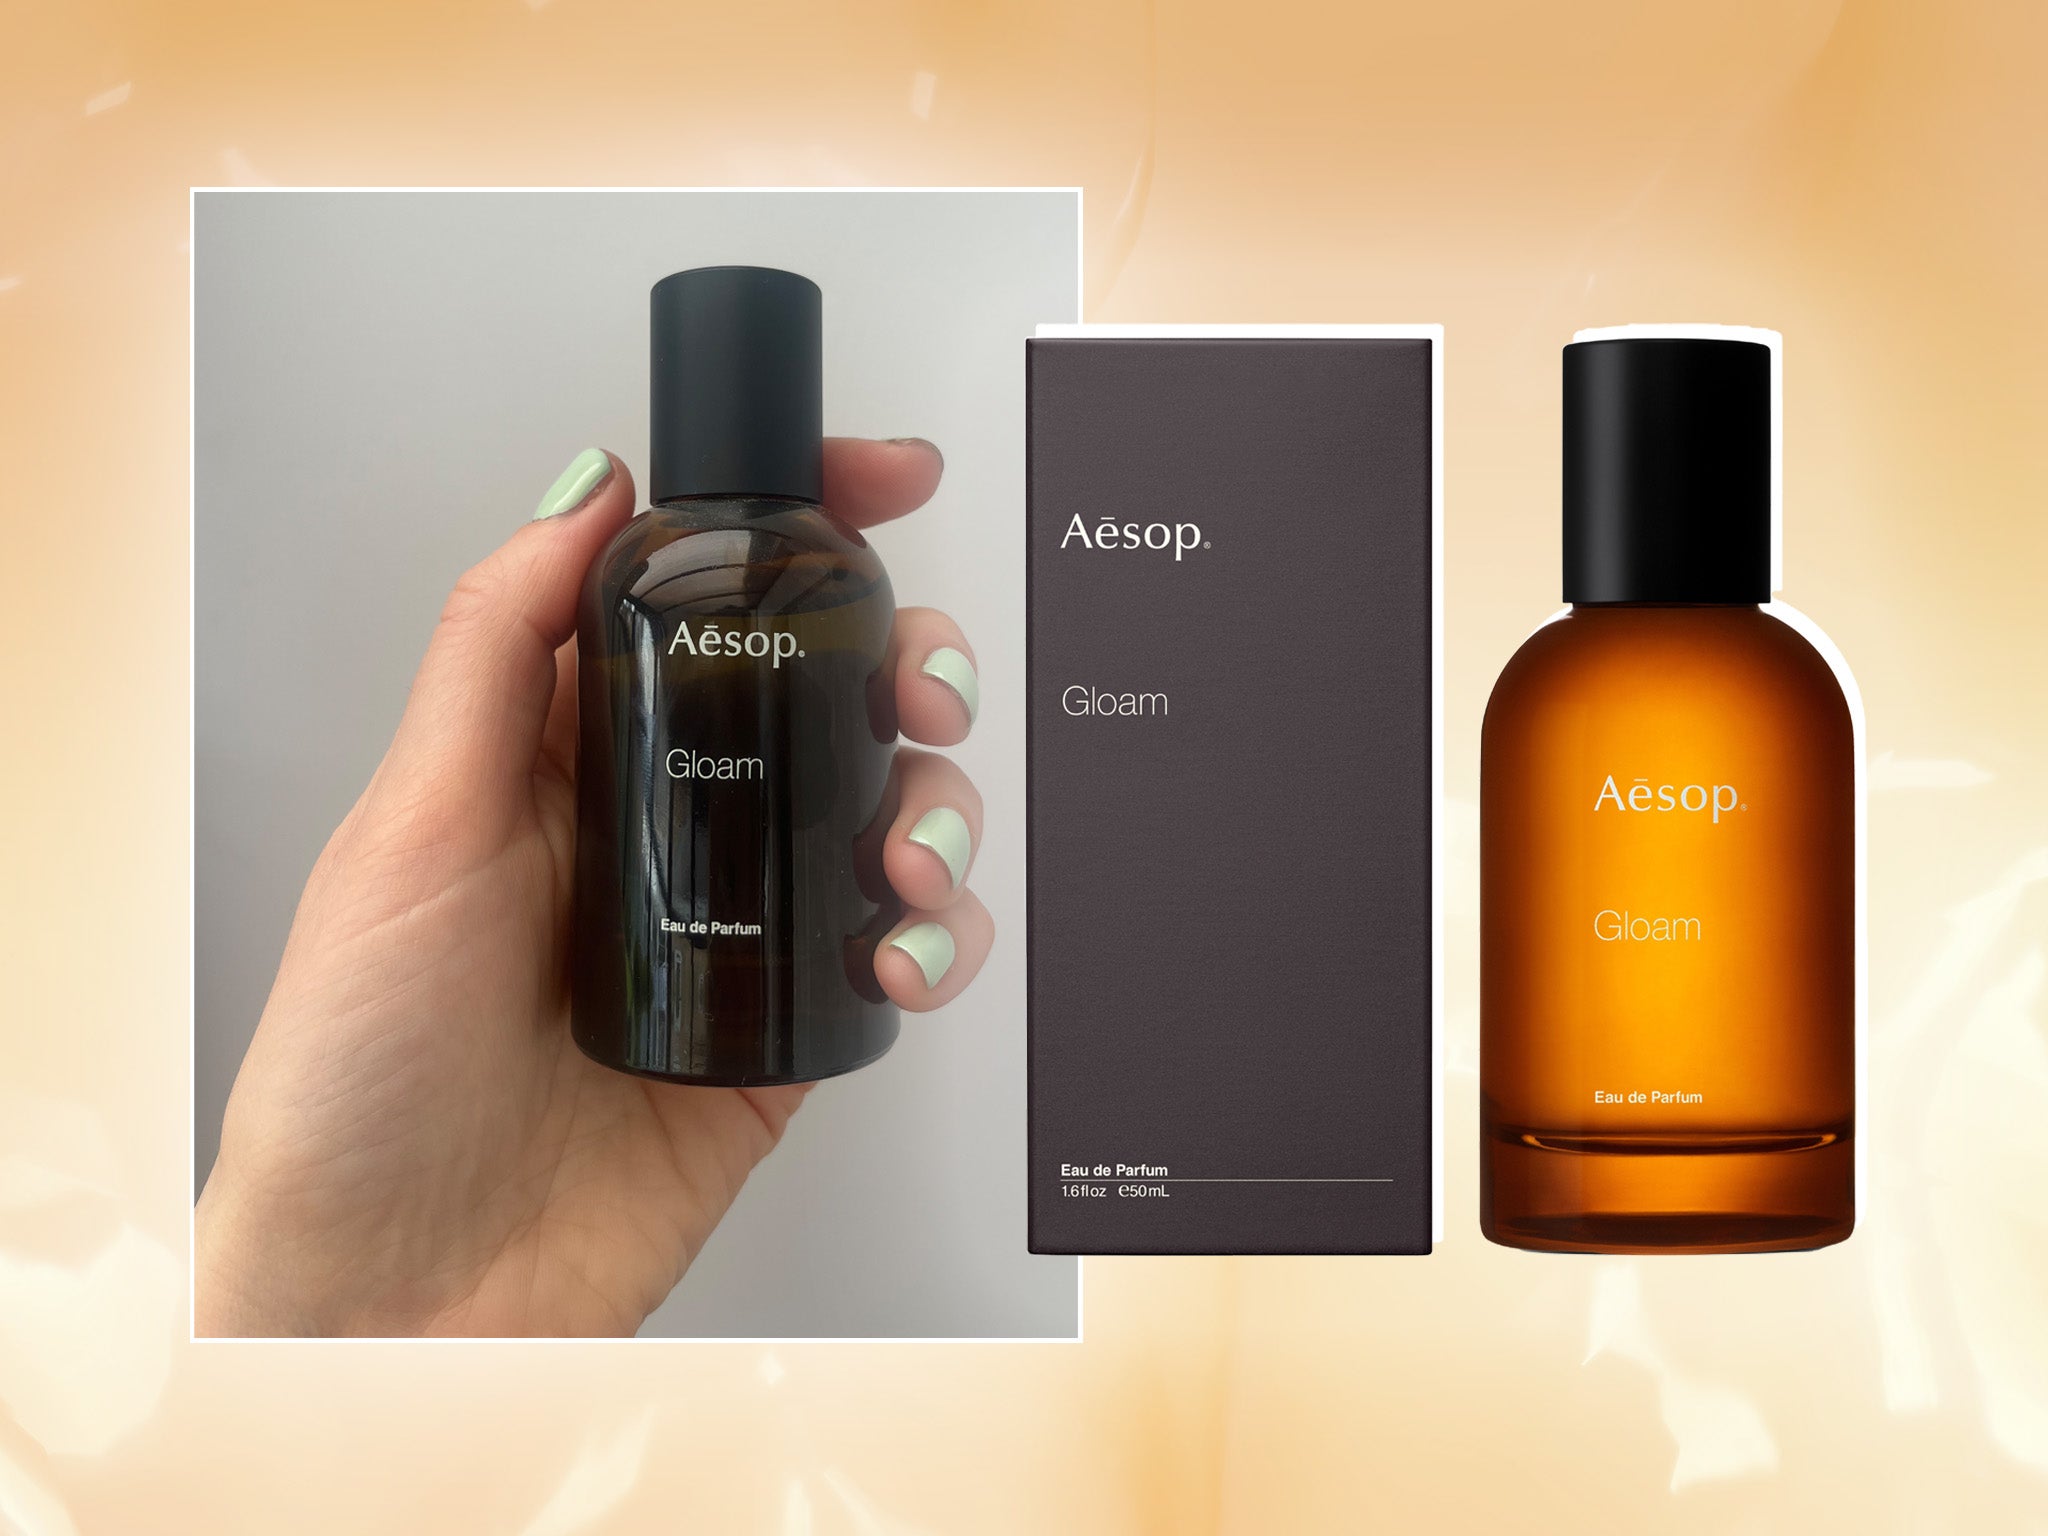 Aēsop gloam review: We spent a month sampling the new botanical scent